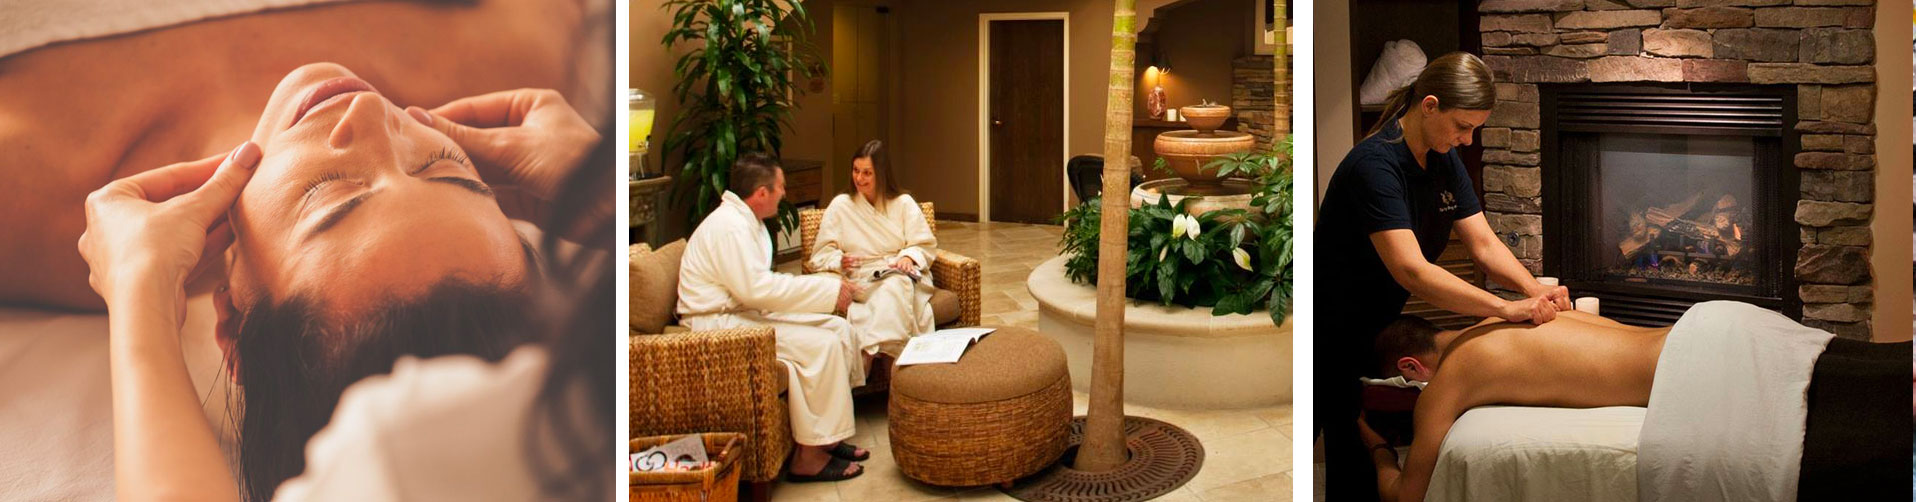 luxurious day spa packages with massage facial and spa amenities